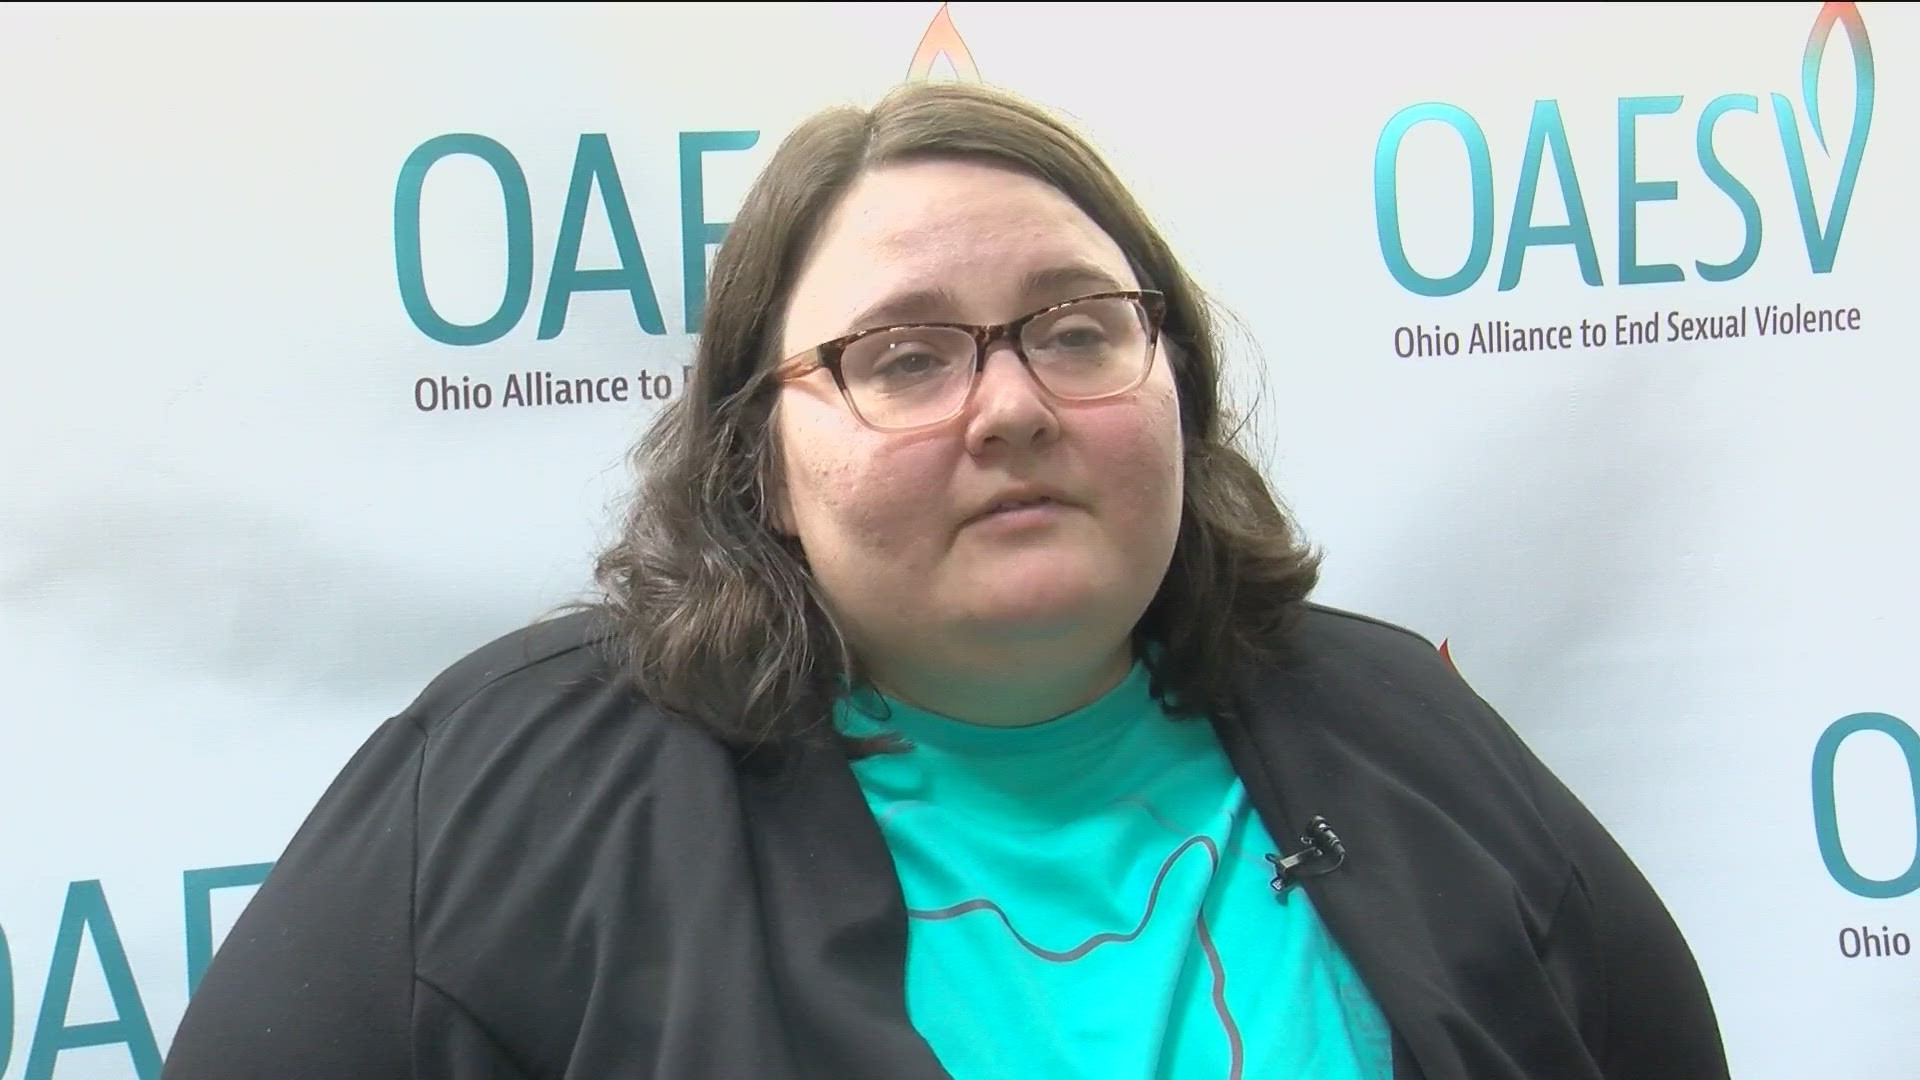 Advocates press for changes in Ohio law to make it easier for survivors of child sex abuse to get justice.